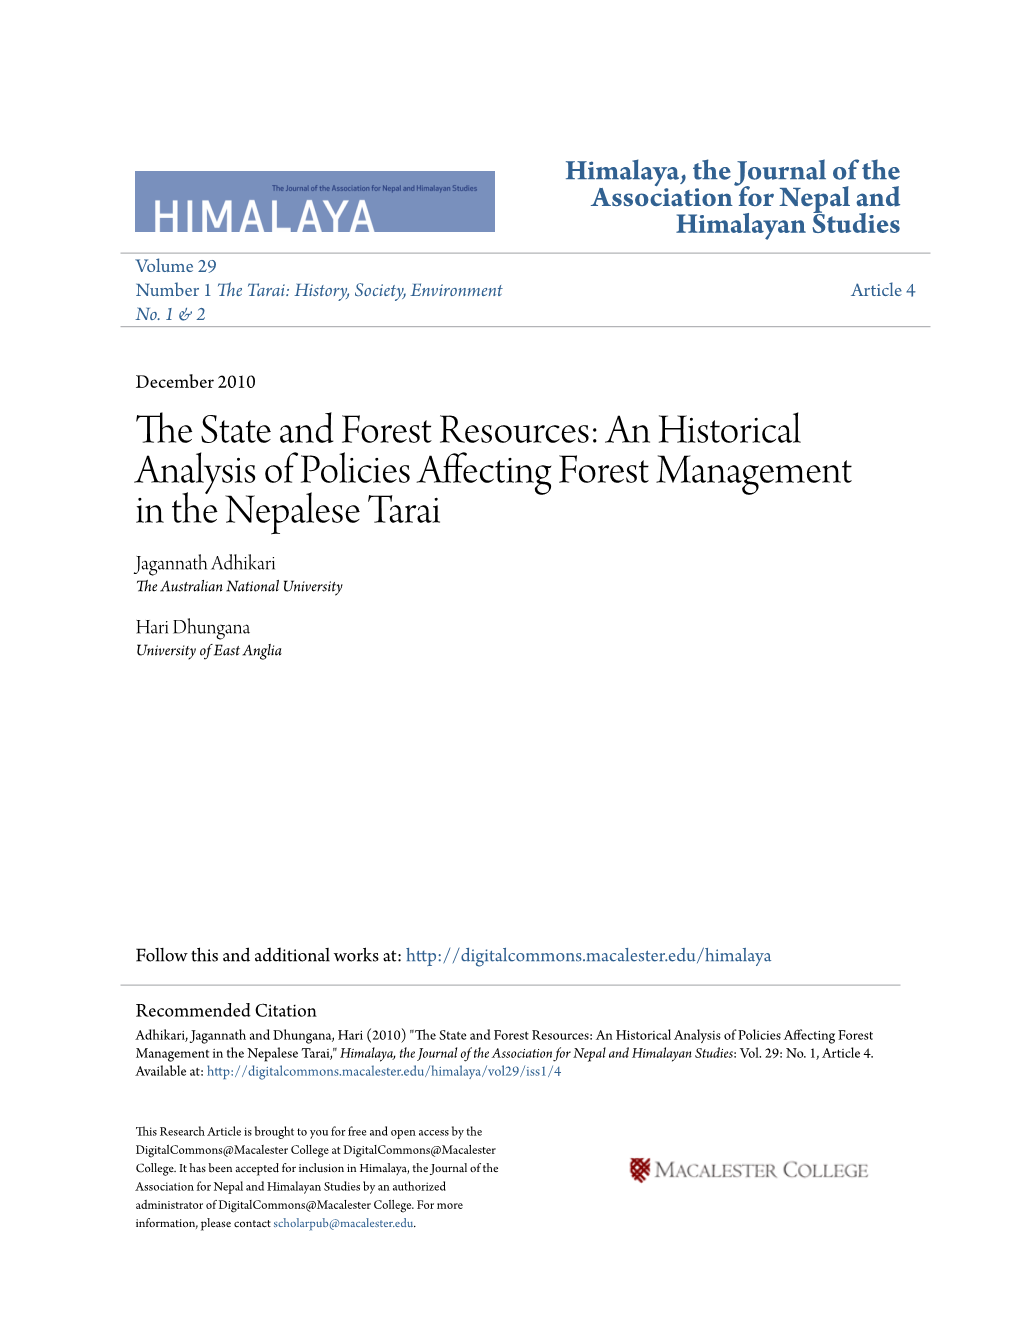 The State and Forest Resources: an Historical Analysis of Policies Affecting Forest Management in the Nepalese Tarai